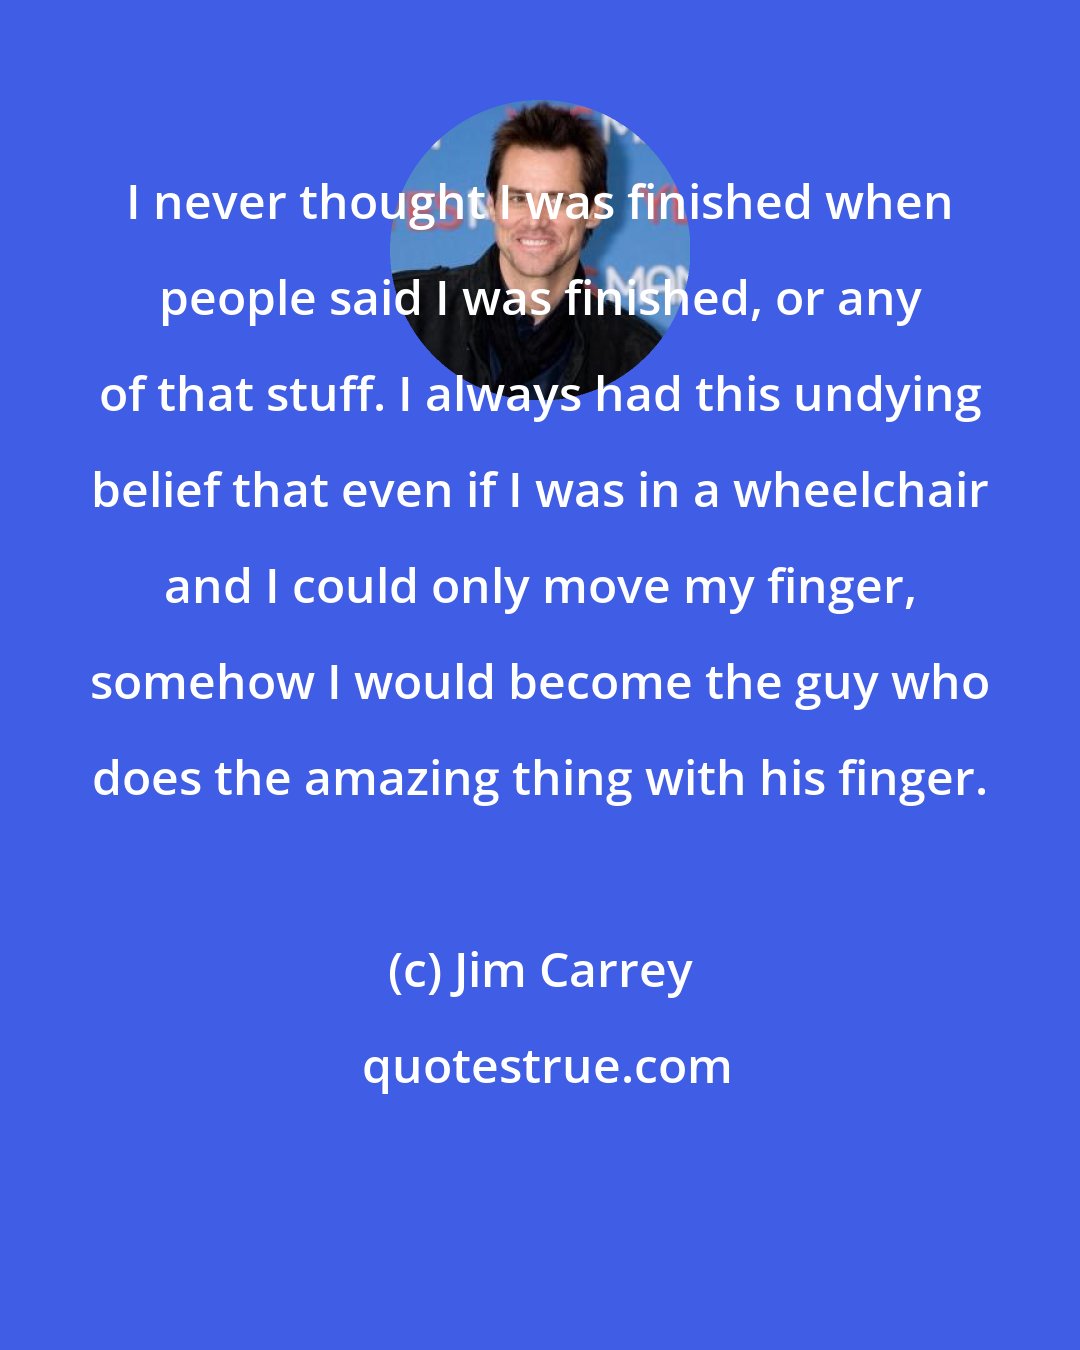 Jim Carrey: I never thought I was finished when people said I was finished, or any of that stuff. I always had this undying belief that even if I was in a wheelchair and I could only move my finger, somehow I would become the guy who does the amazing thing with his finger.